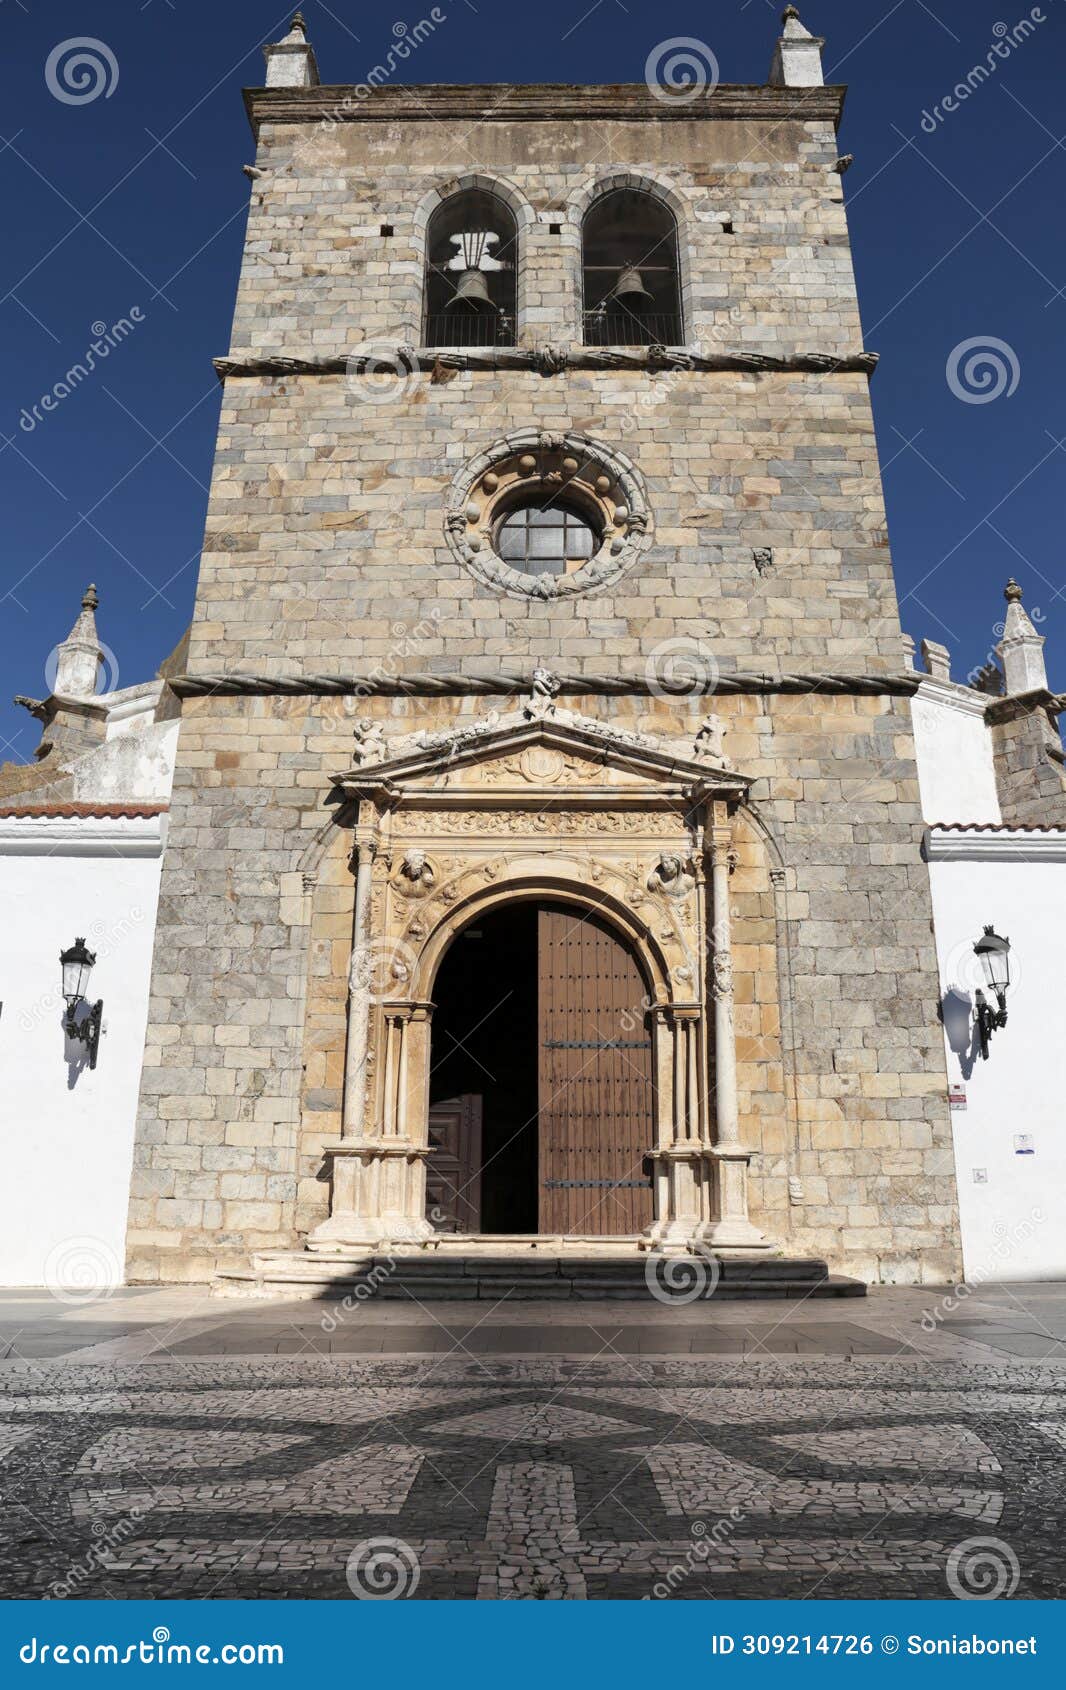 church of saint mary magdalene in olivenza town